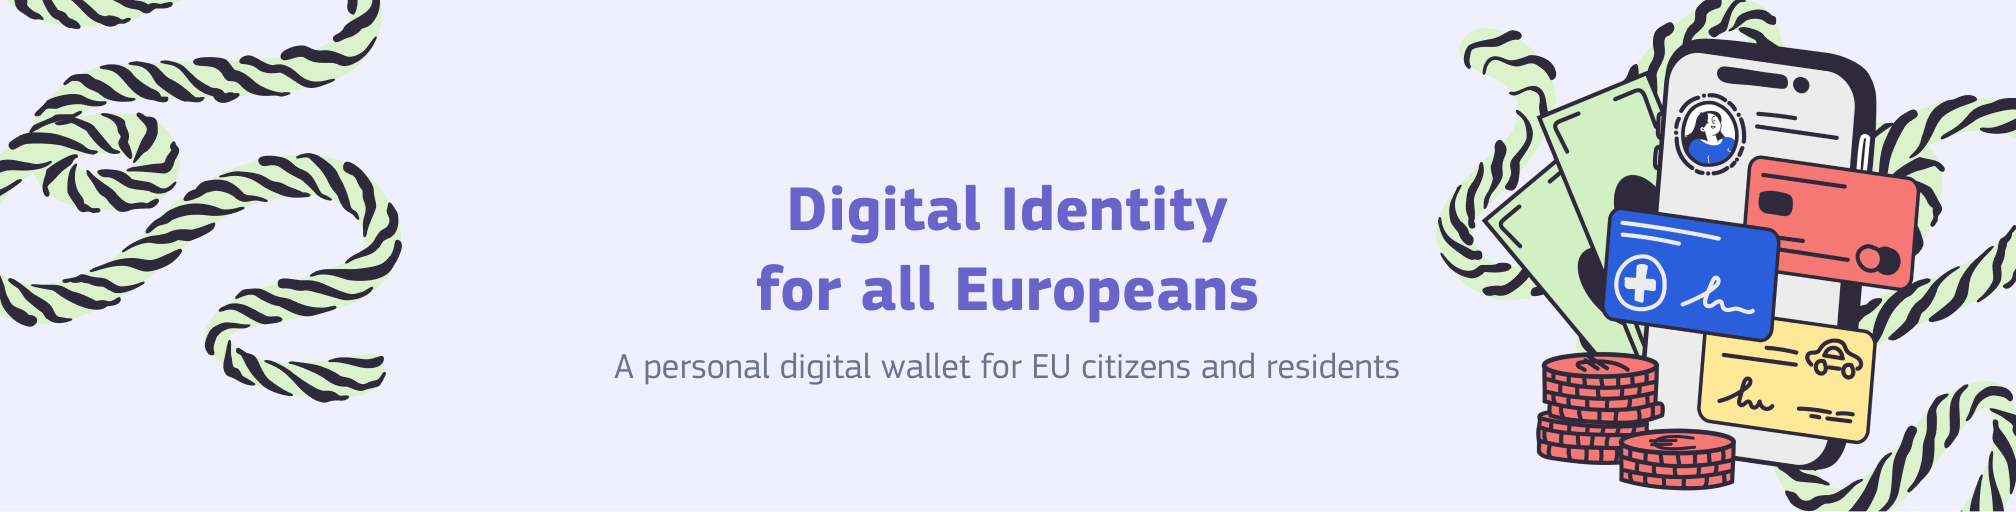 Digital Identity for all Europeans - A personal digital wallet for EU citizens and residents